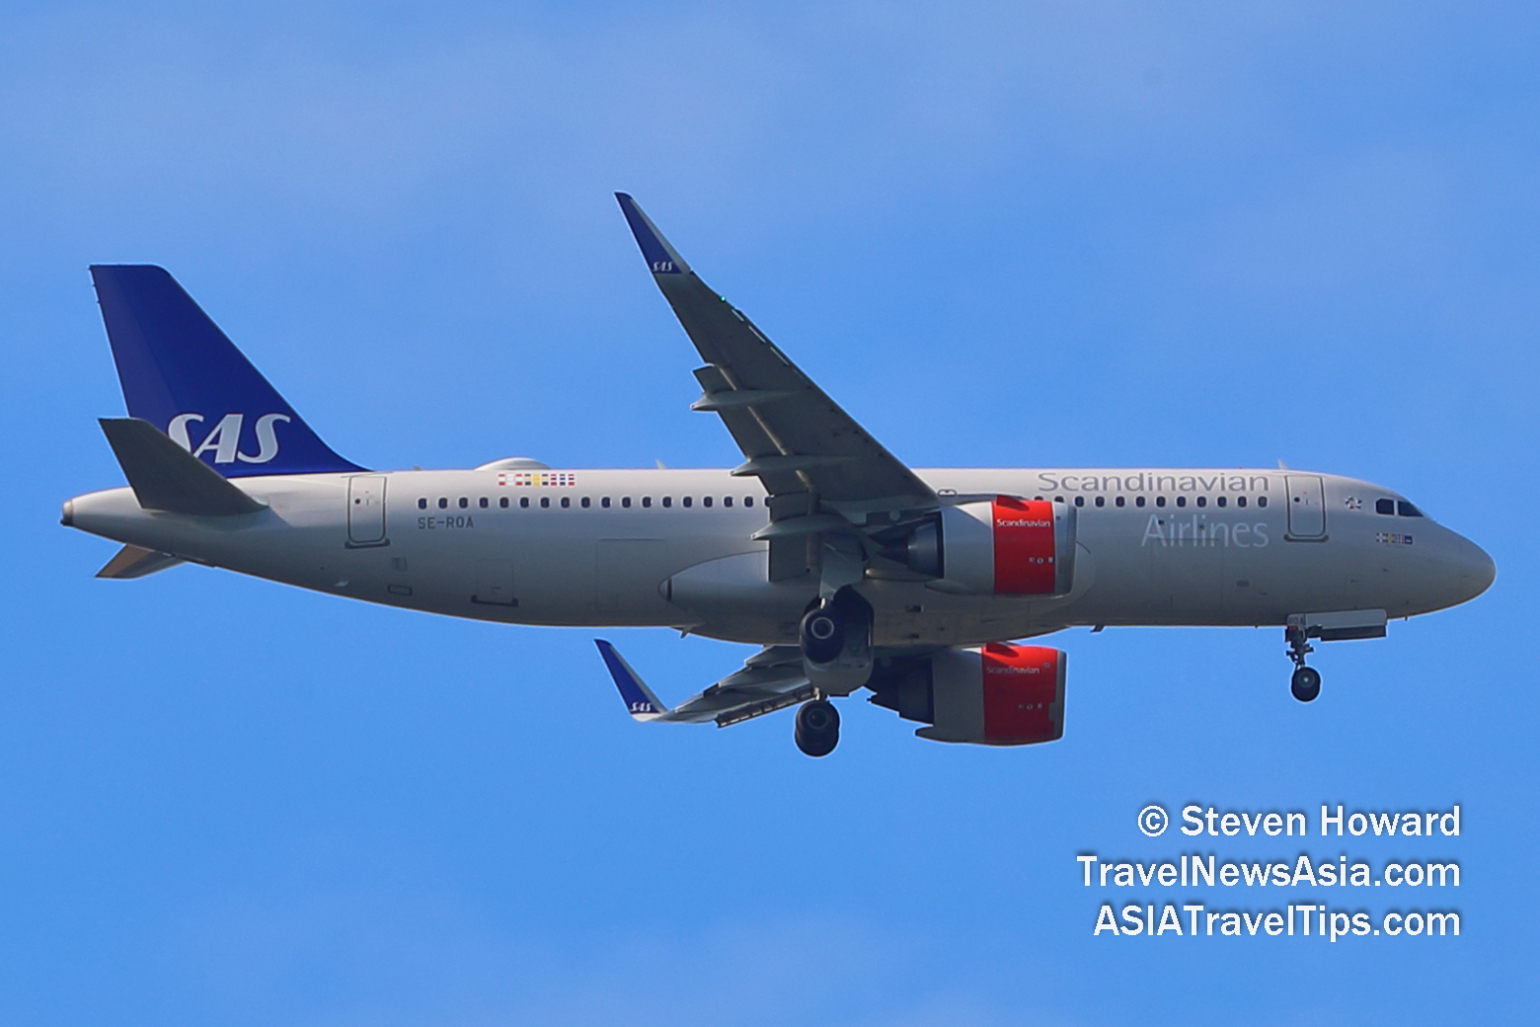 SAS A320 reg: SE-ROA. Picture by Steven Howard of TravelNewsAsia.com Click to enlarge.